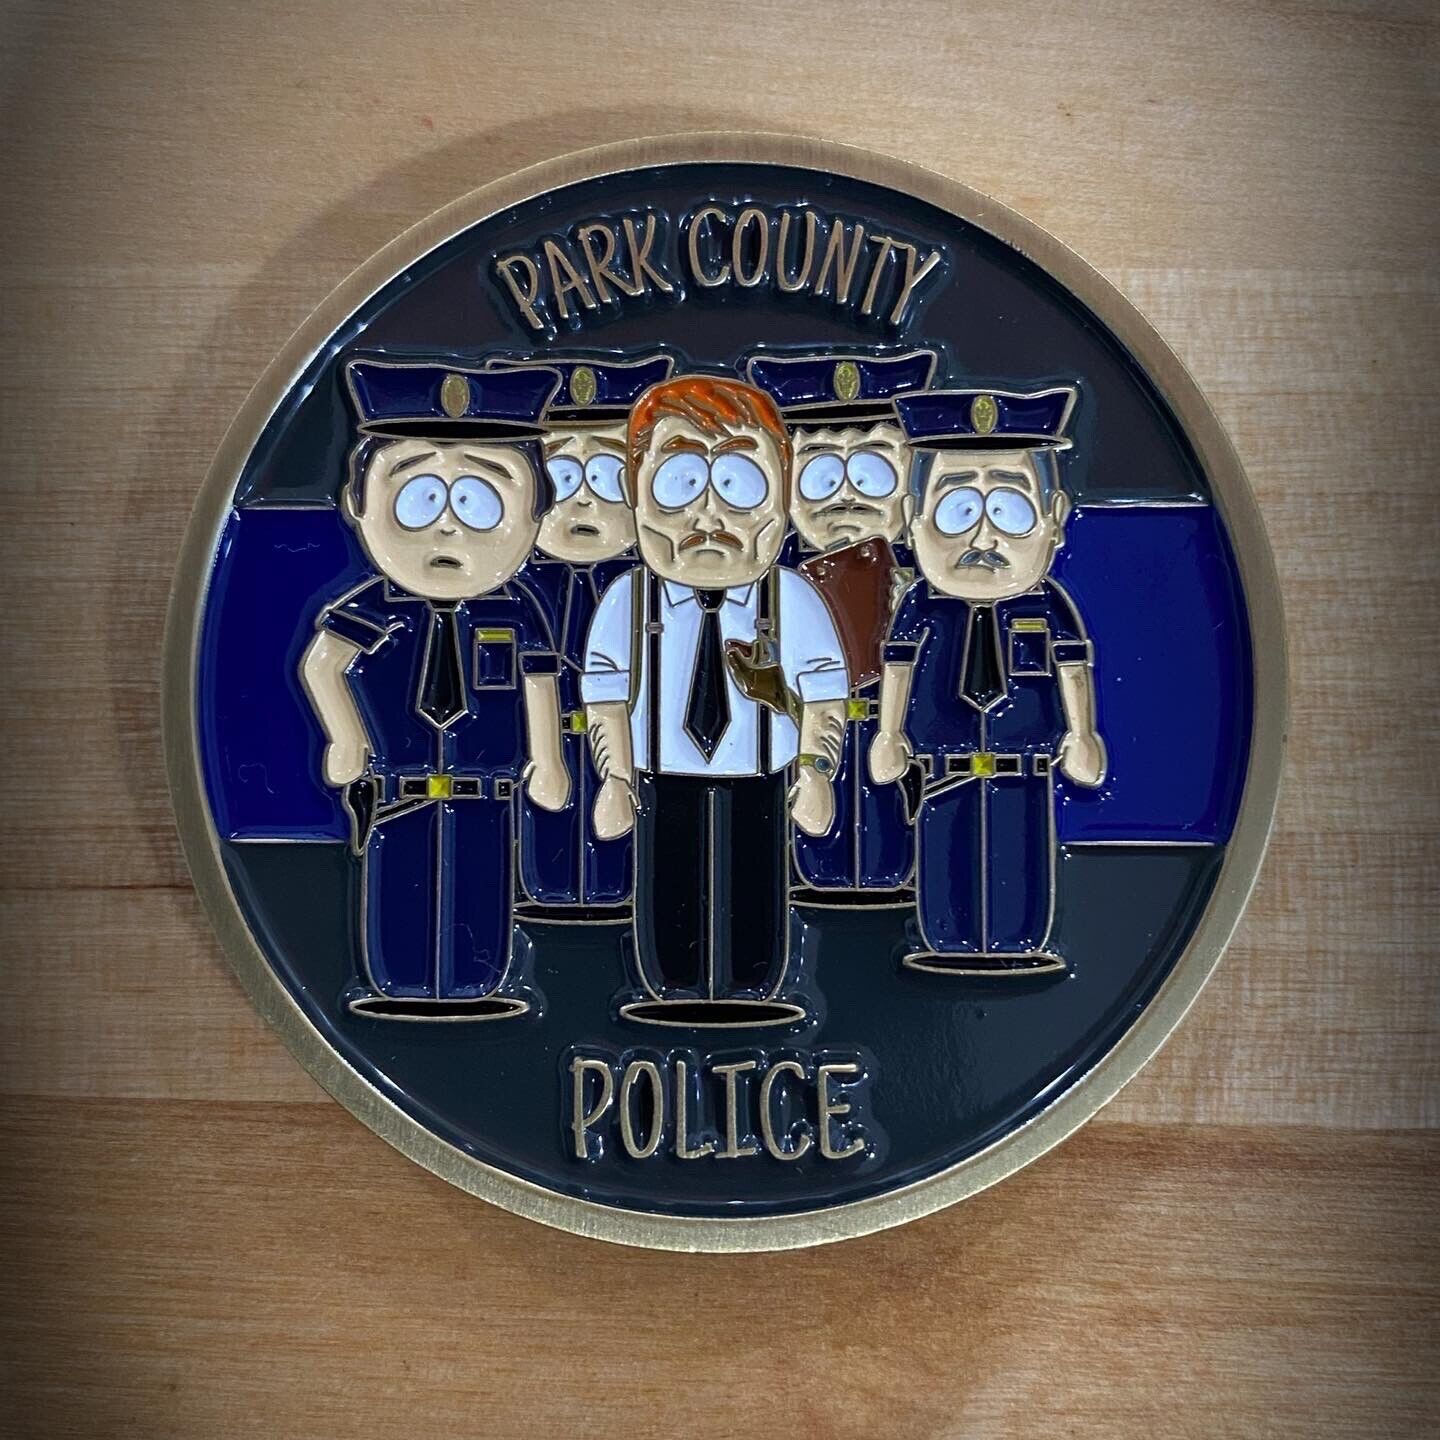 New Limited Southpark Police Department Challenge Coin